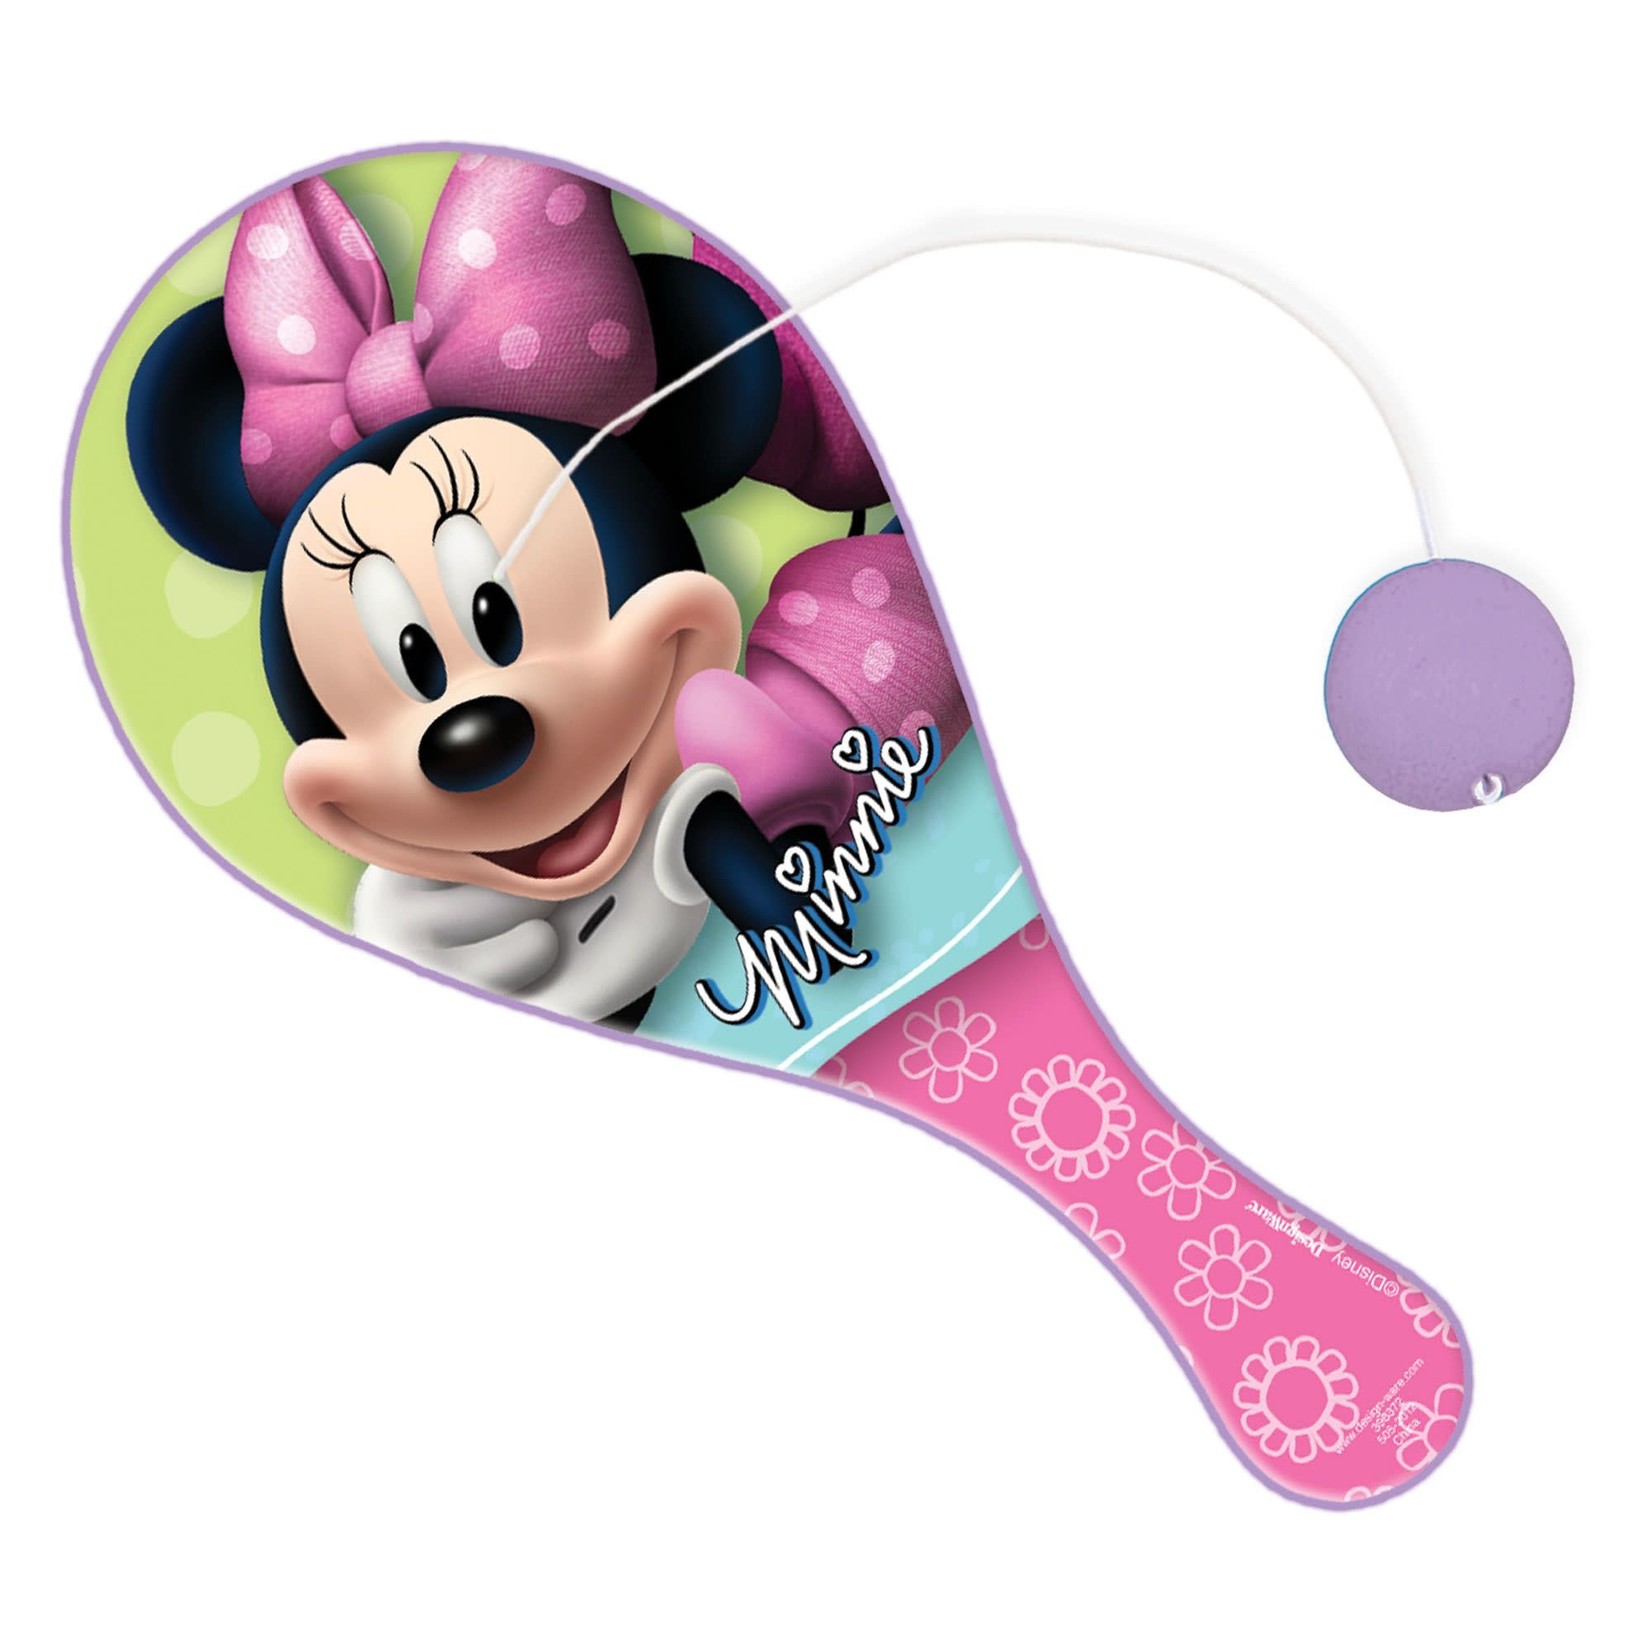 Minnie Mouse Paddle Ball